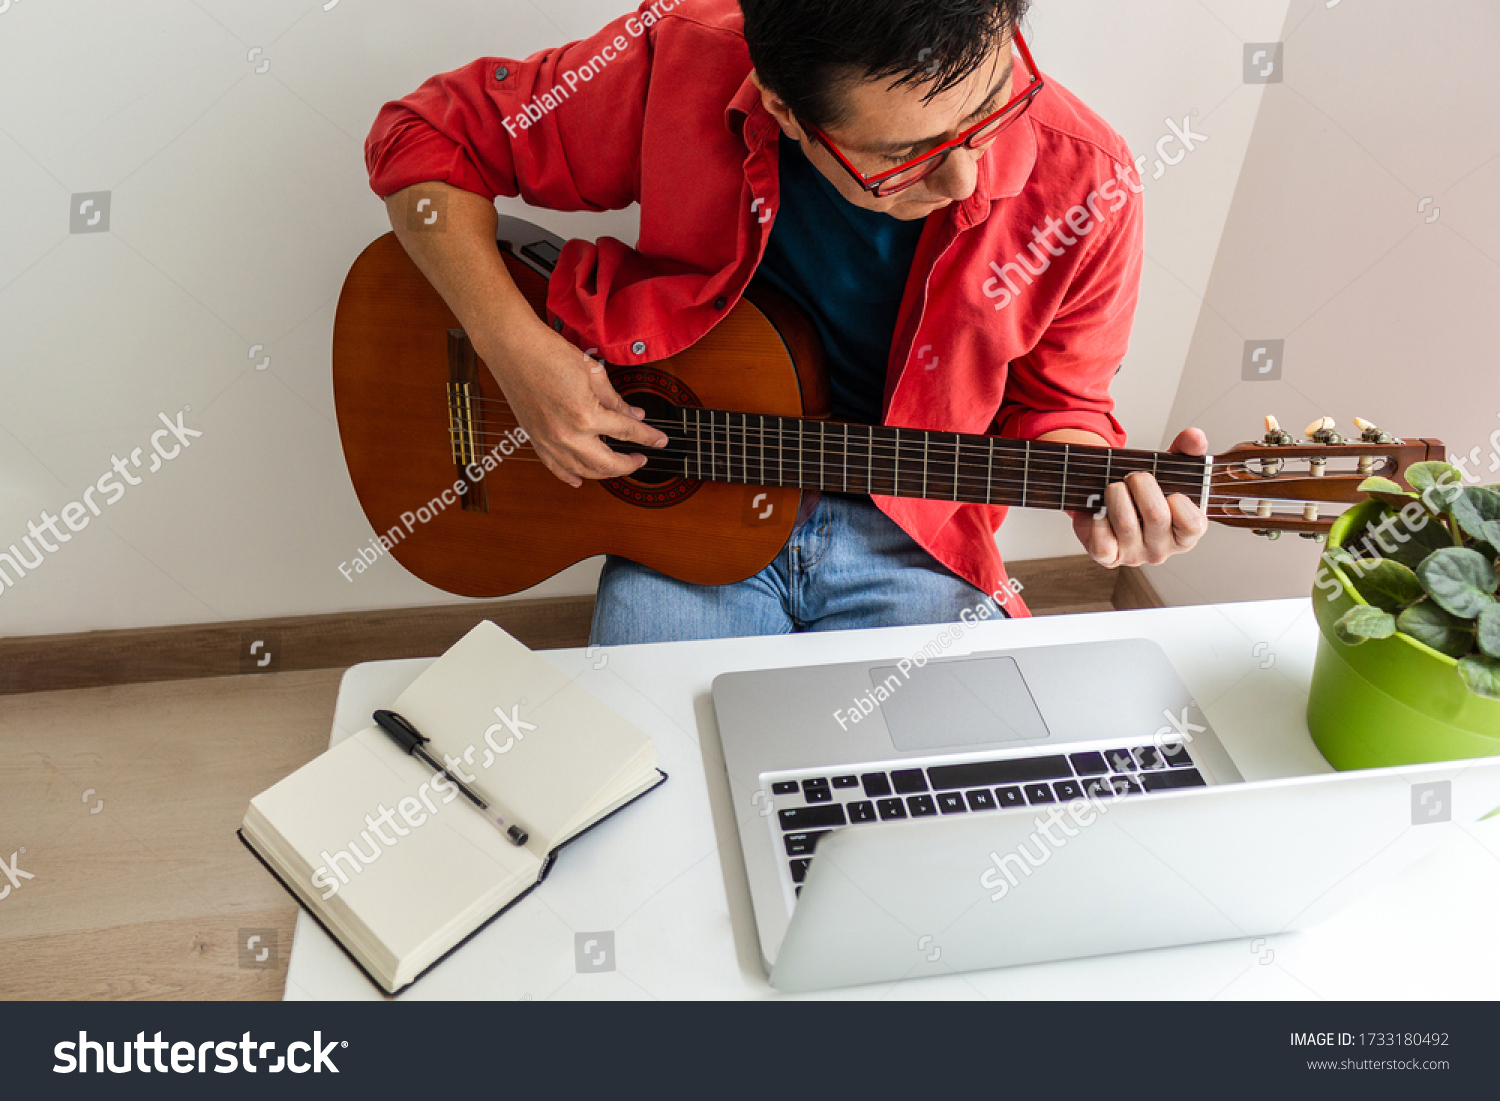 In a room at home a man plays the guitar in front of his laptop during an online class #1733180492